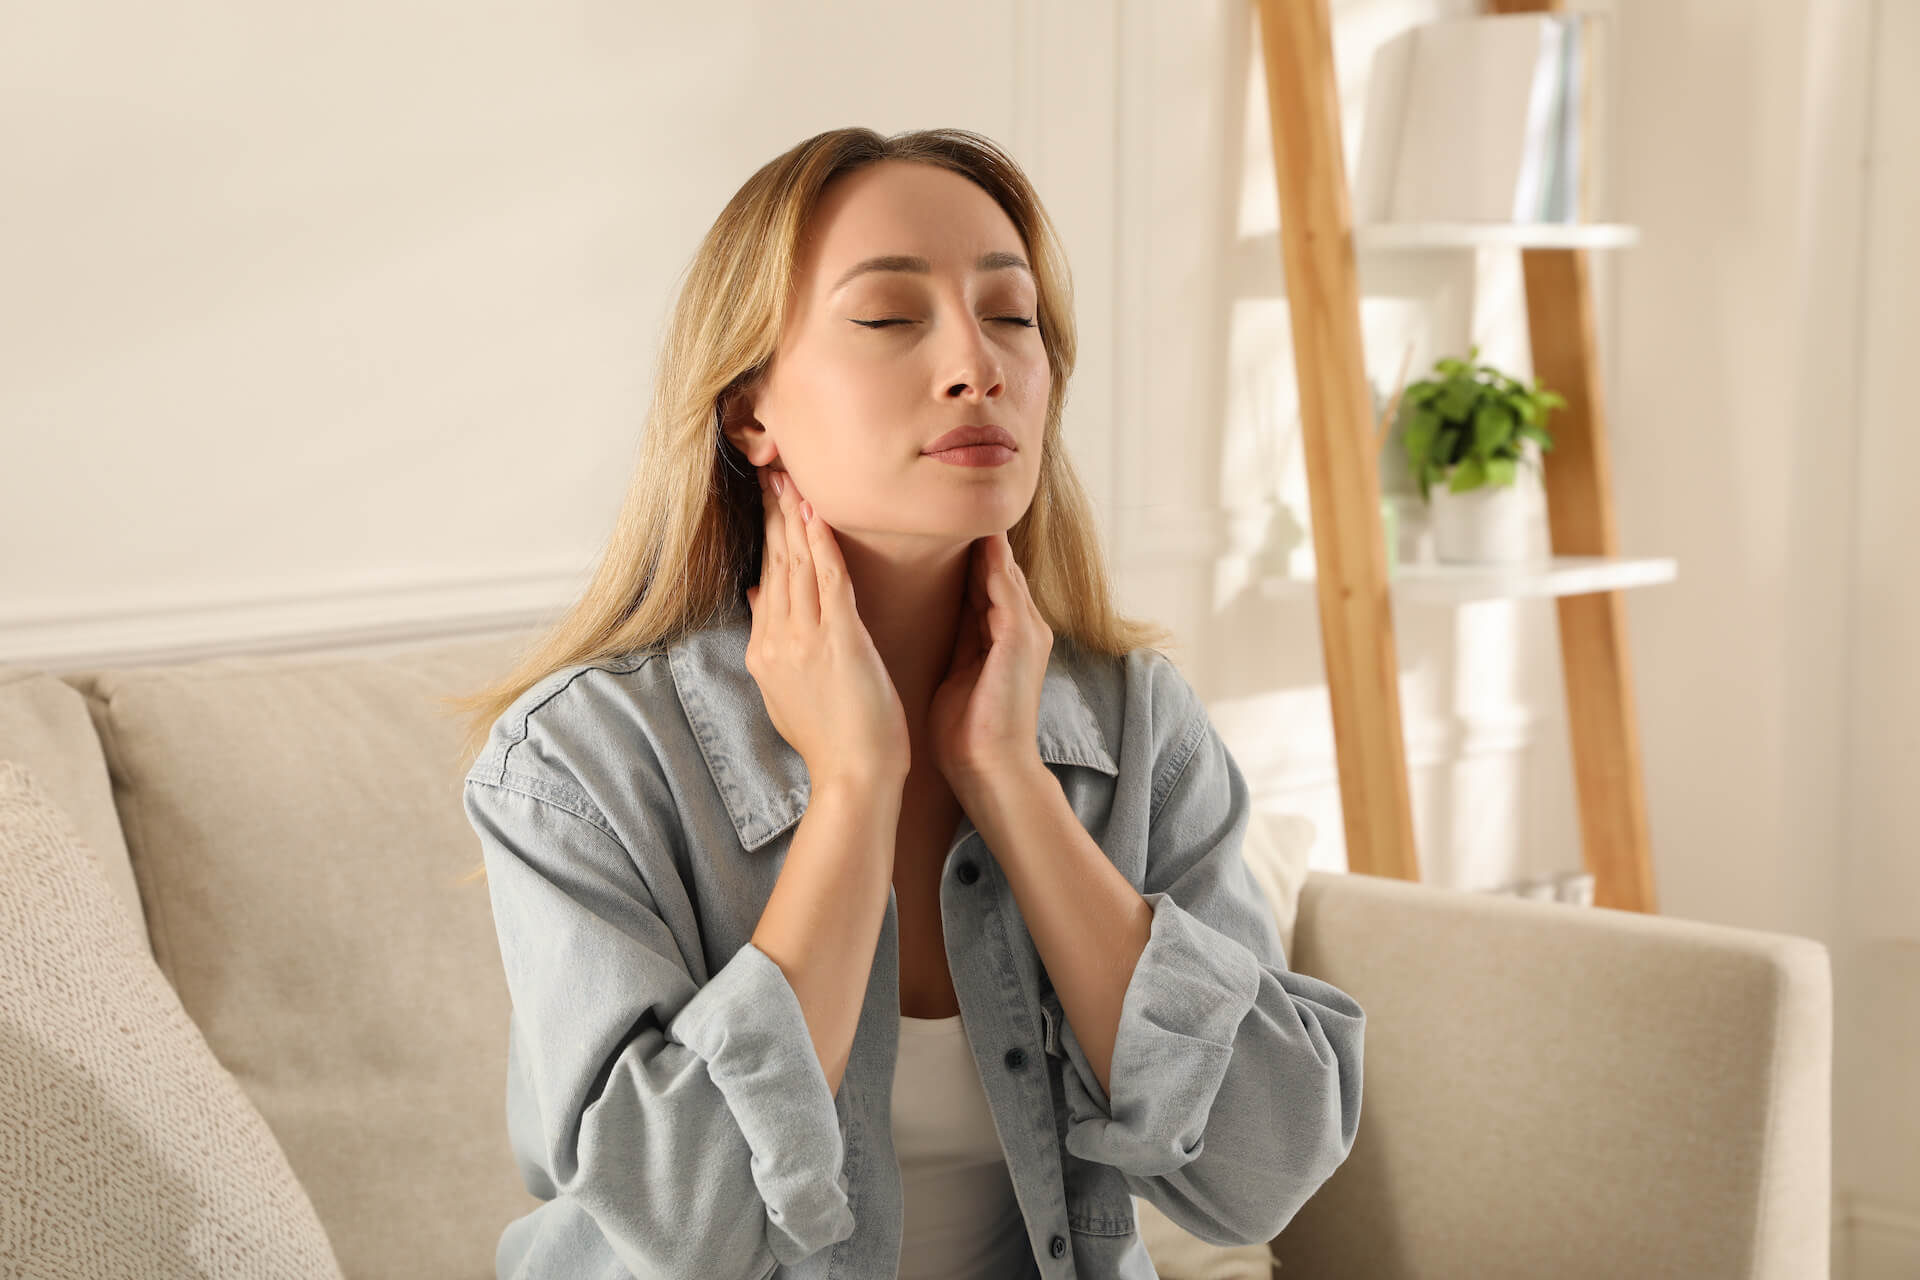 Hypothyroidism Symptoms, Causes, and Treatment Options